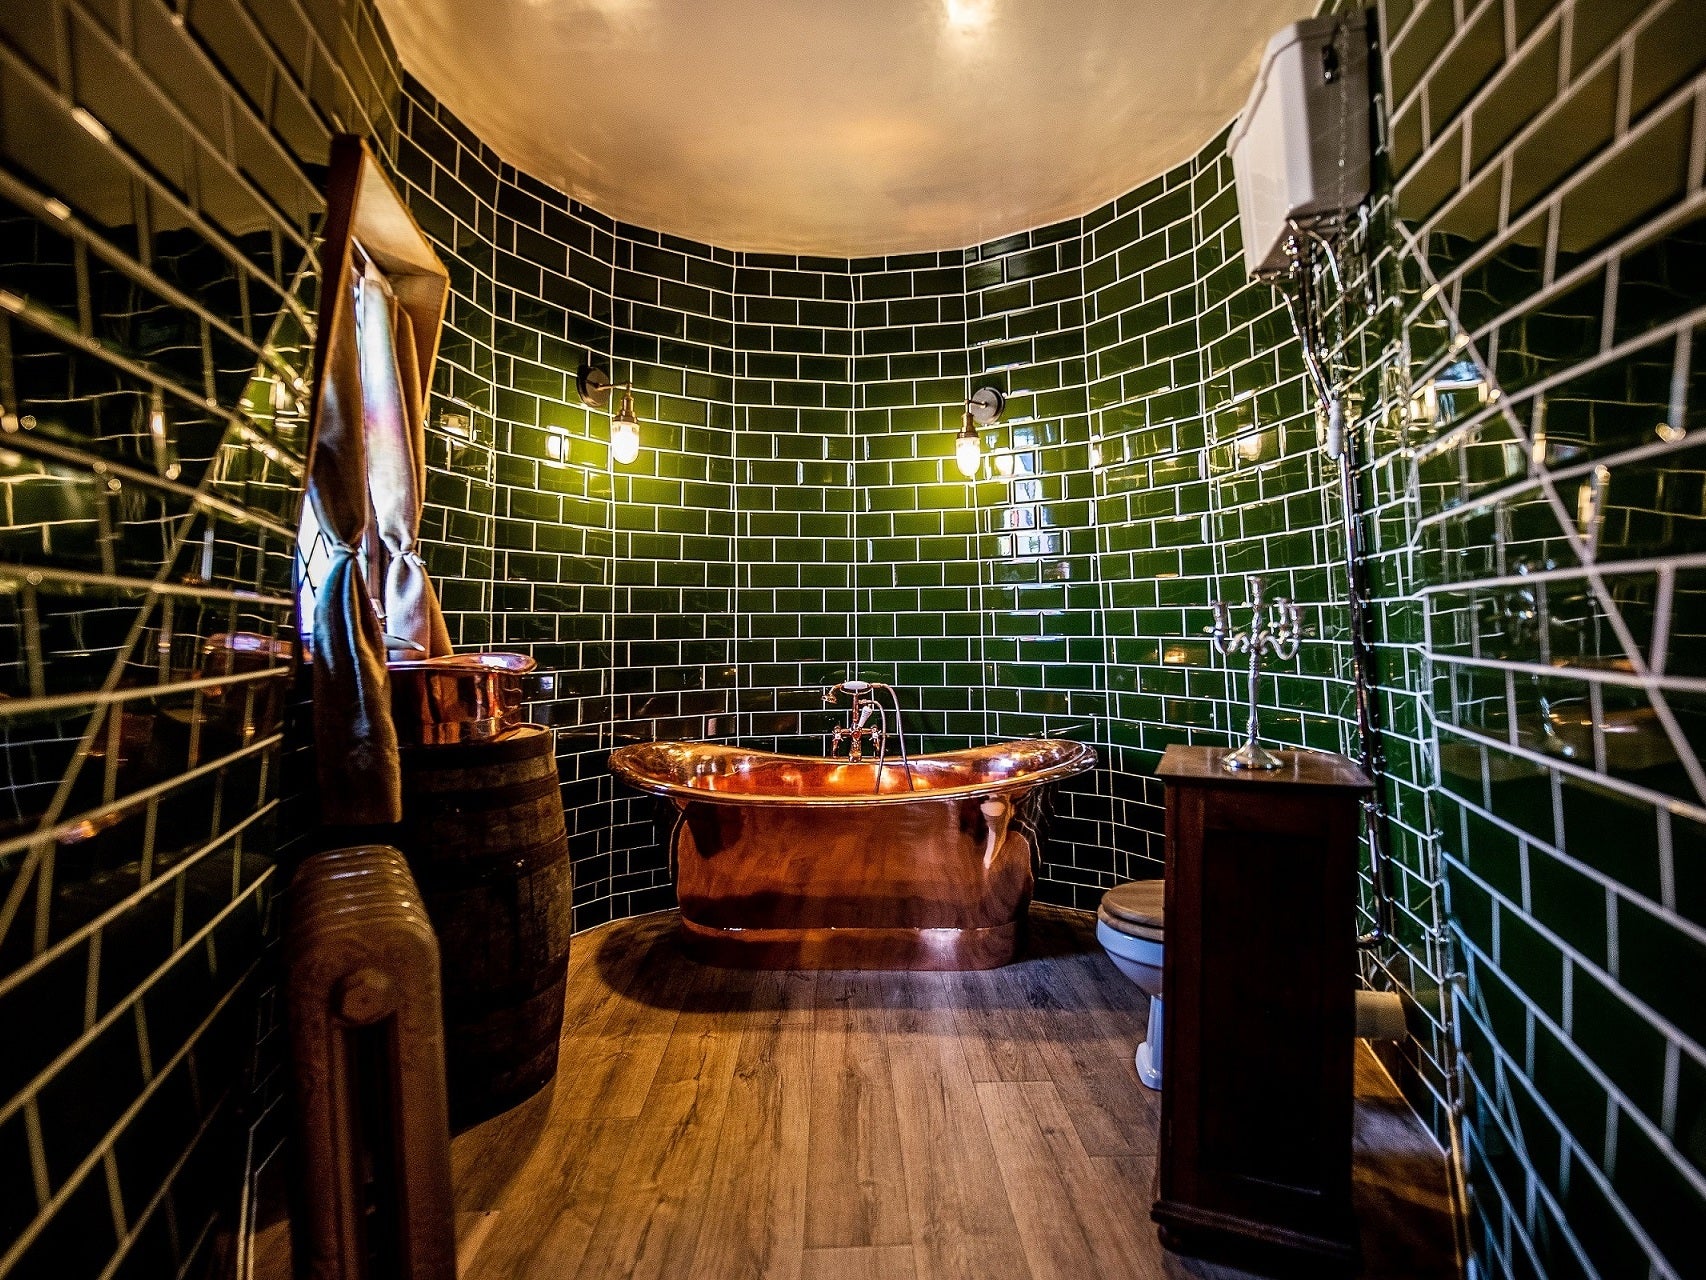 The bathroom is designed with colours reminiscent of the Slytherin Common Room